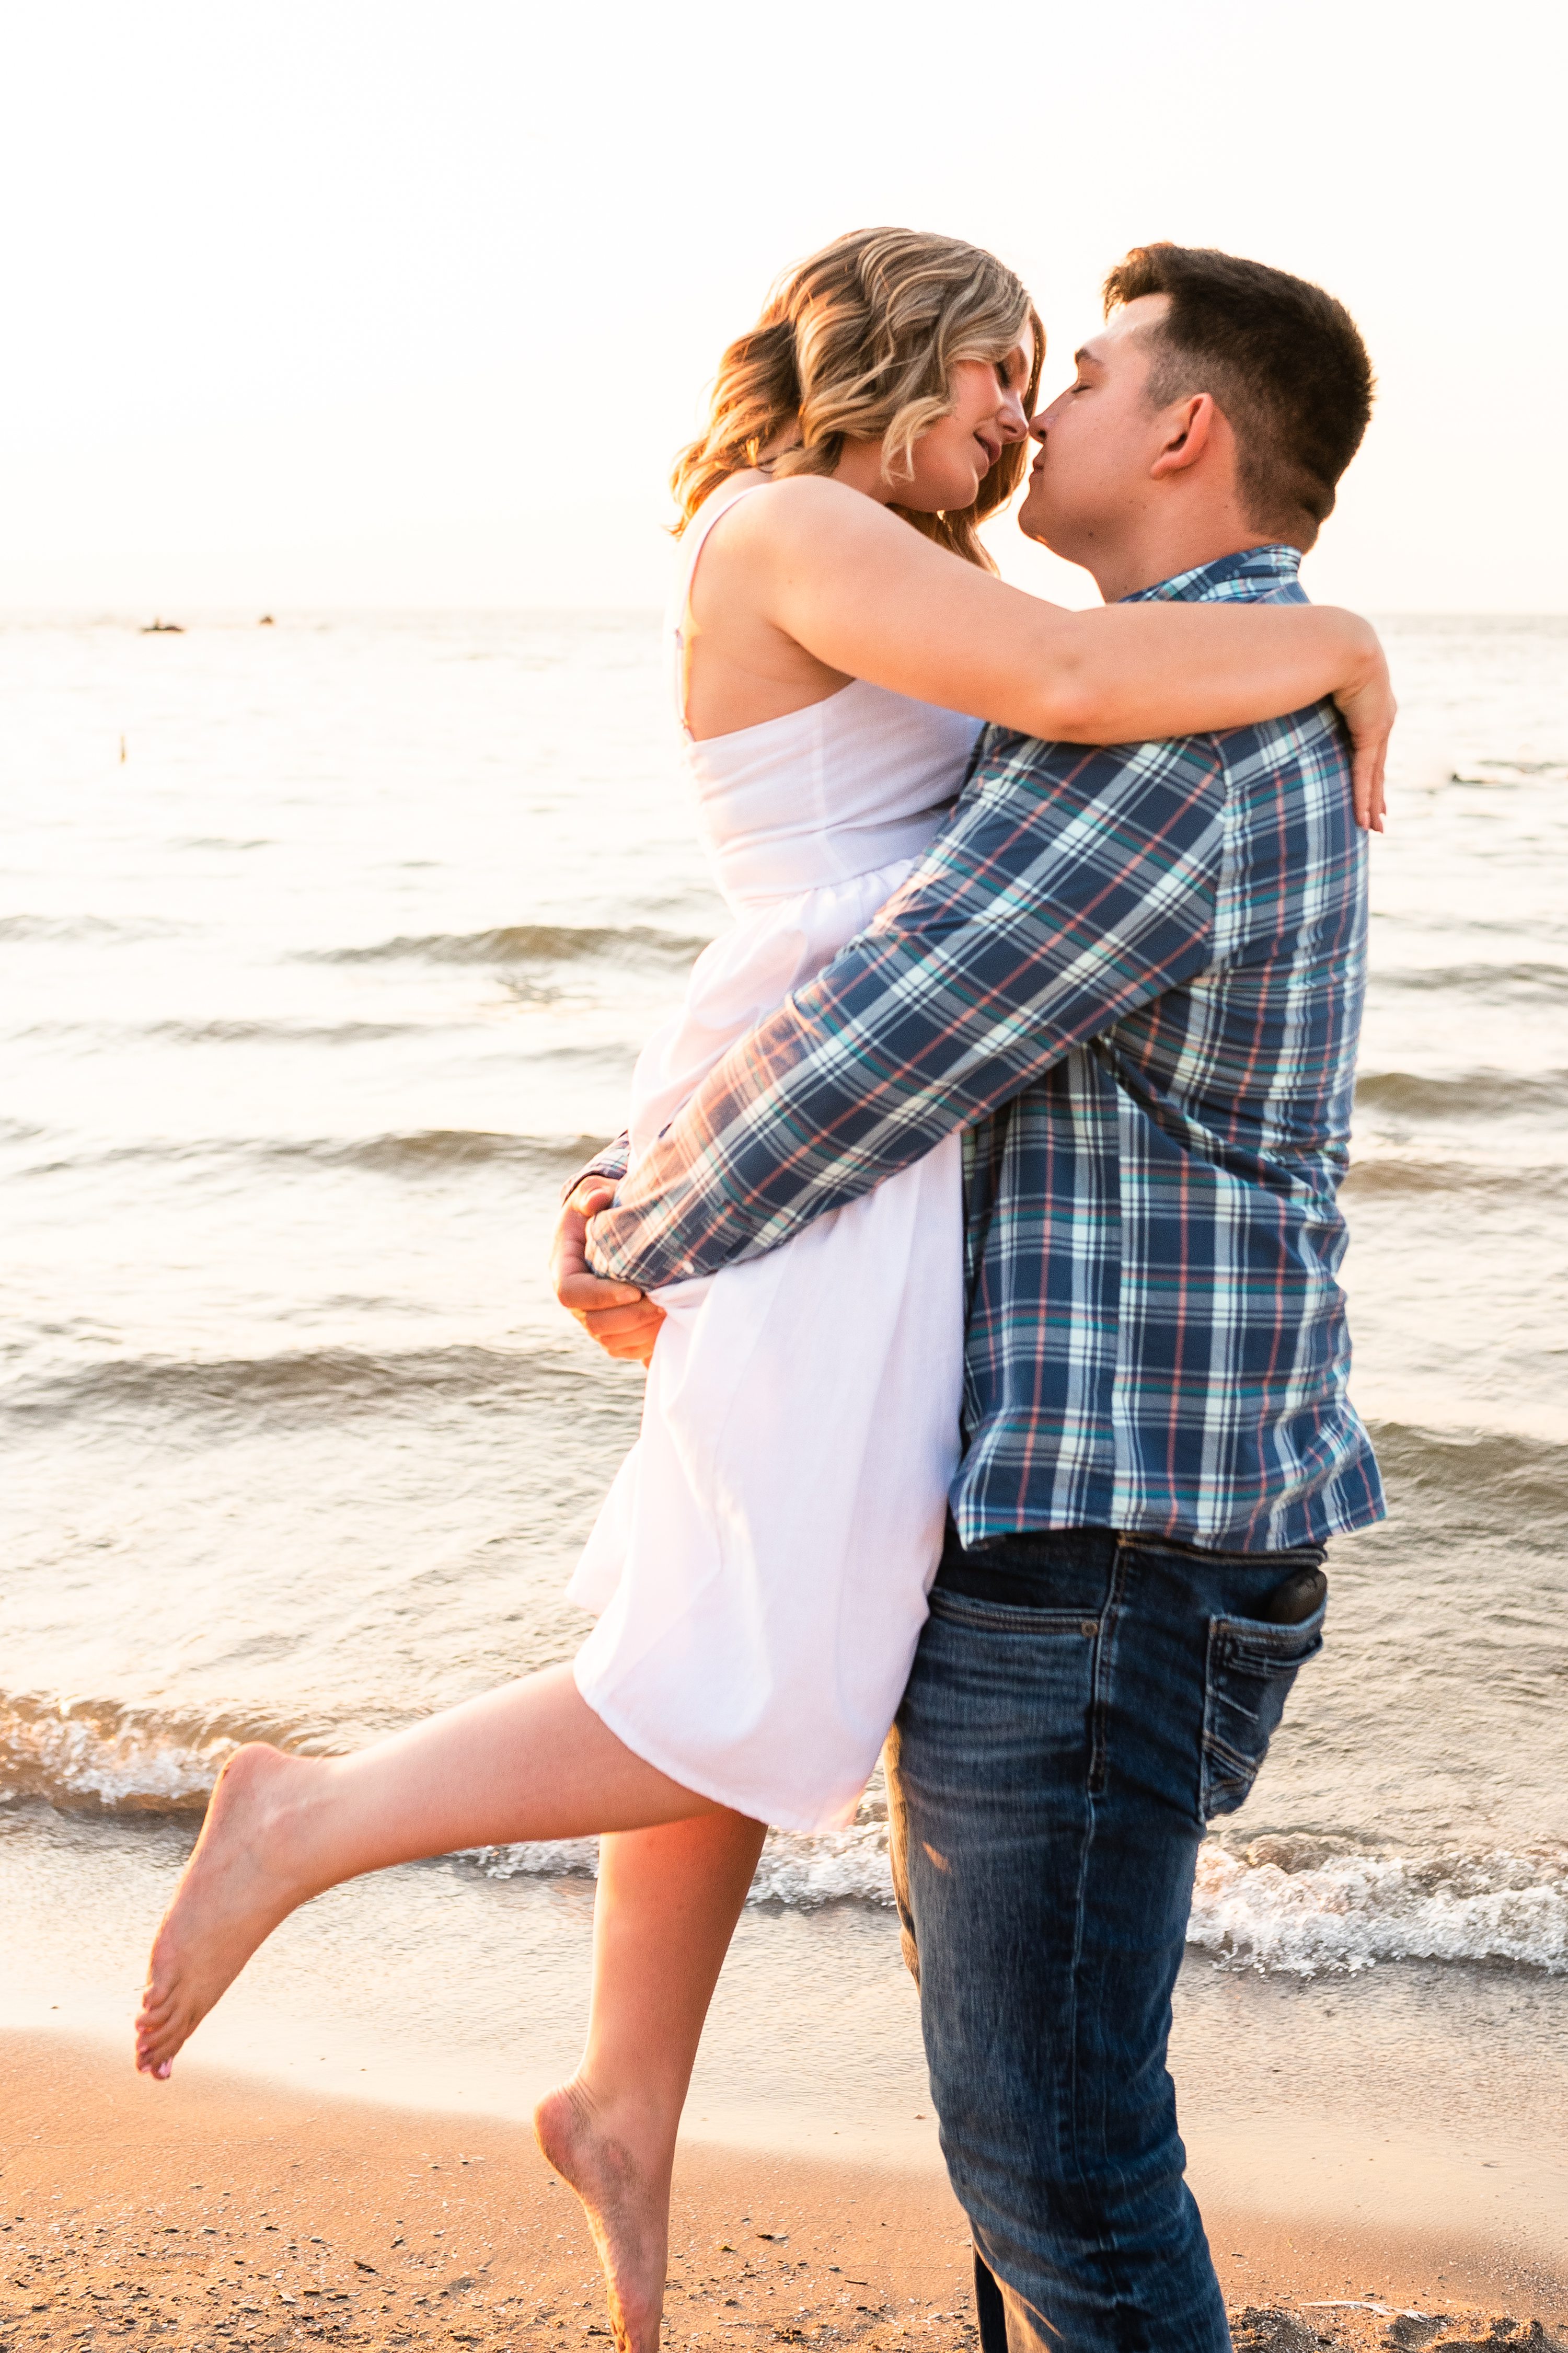 Cleveland Photographer, Downtown Cleveland, Engagement Photographer, Engagement Session, Hannah + Tyler, Hannh and Tyler, Lake Erie, Lake Erie Engagement Session, Lake Erie photos, Ohio Photographer, Wedding Photographer, cleveland engagement photographer, couple in lake, couple in water, couples session, couples session in water, ohio engagement photographer, photos in water, sunset photos